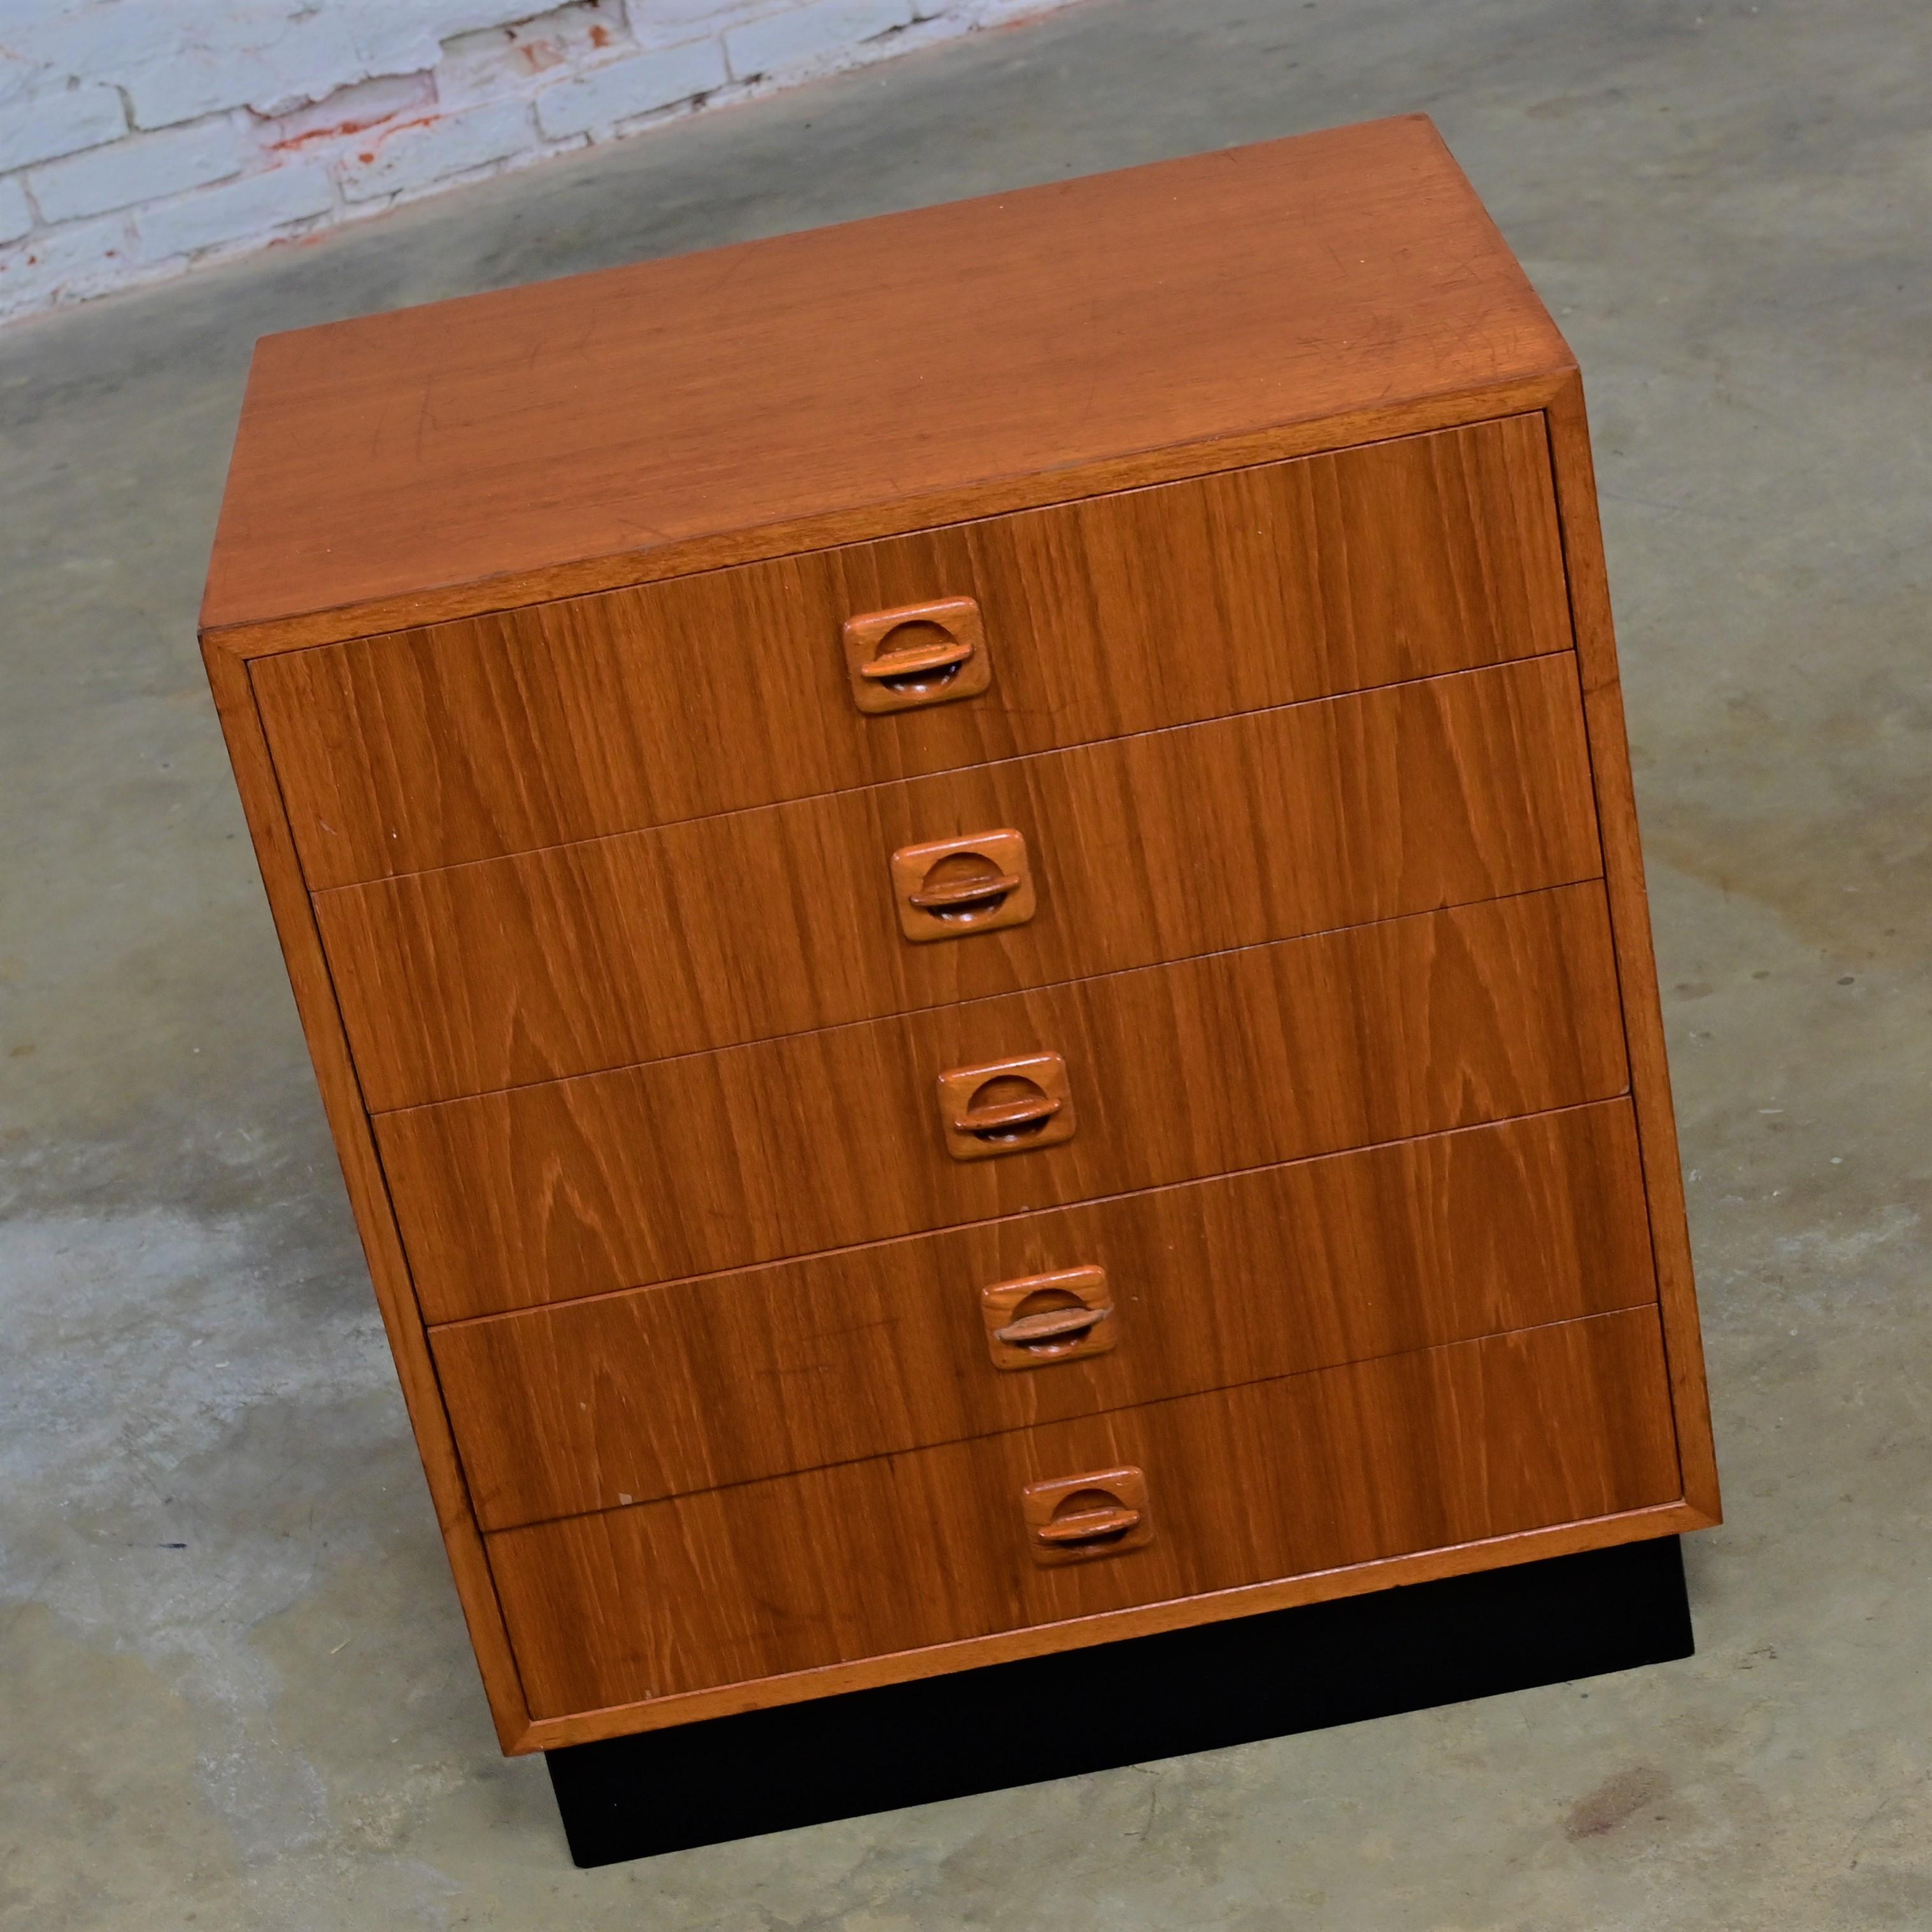 Danish Mid to Late 20th Century Scandinavian Modern Small Teak Cabinet 5 Drawers  For Sale